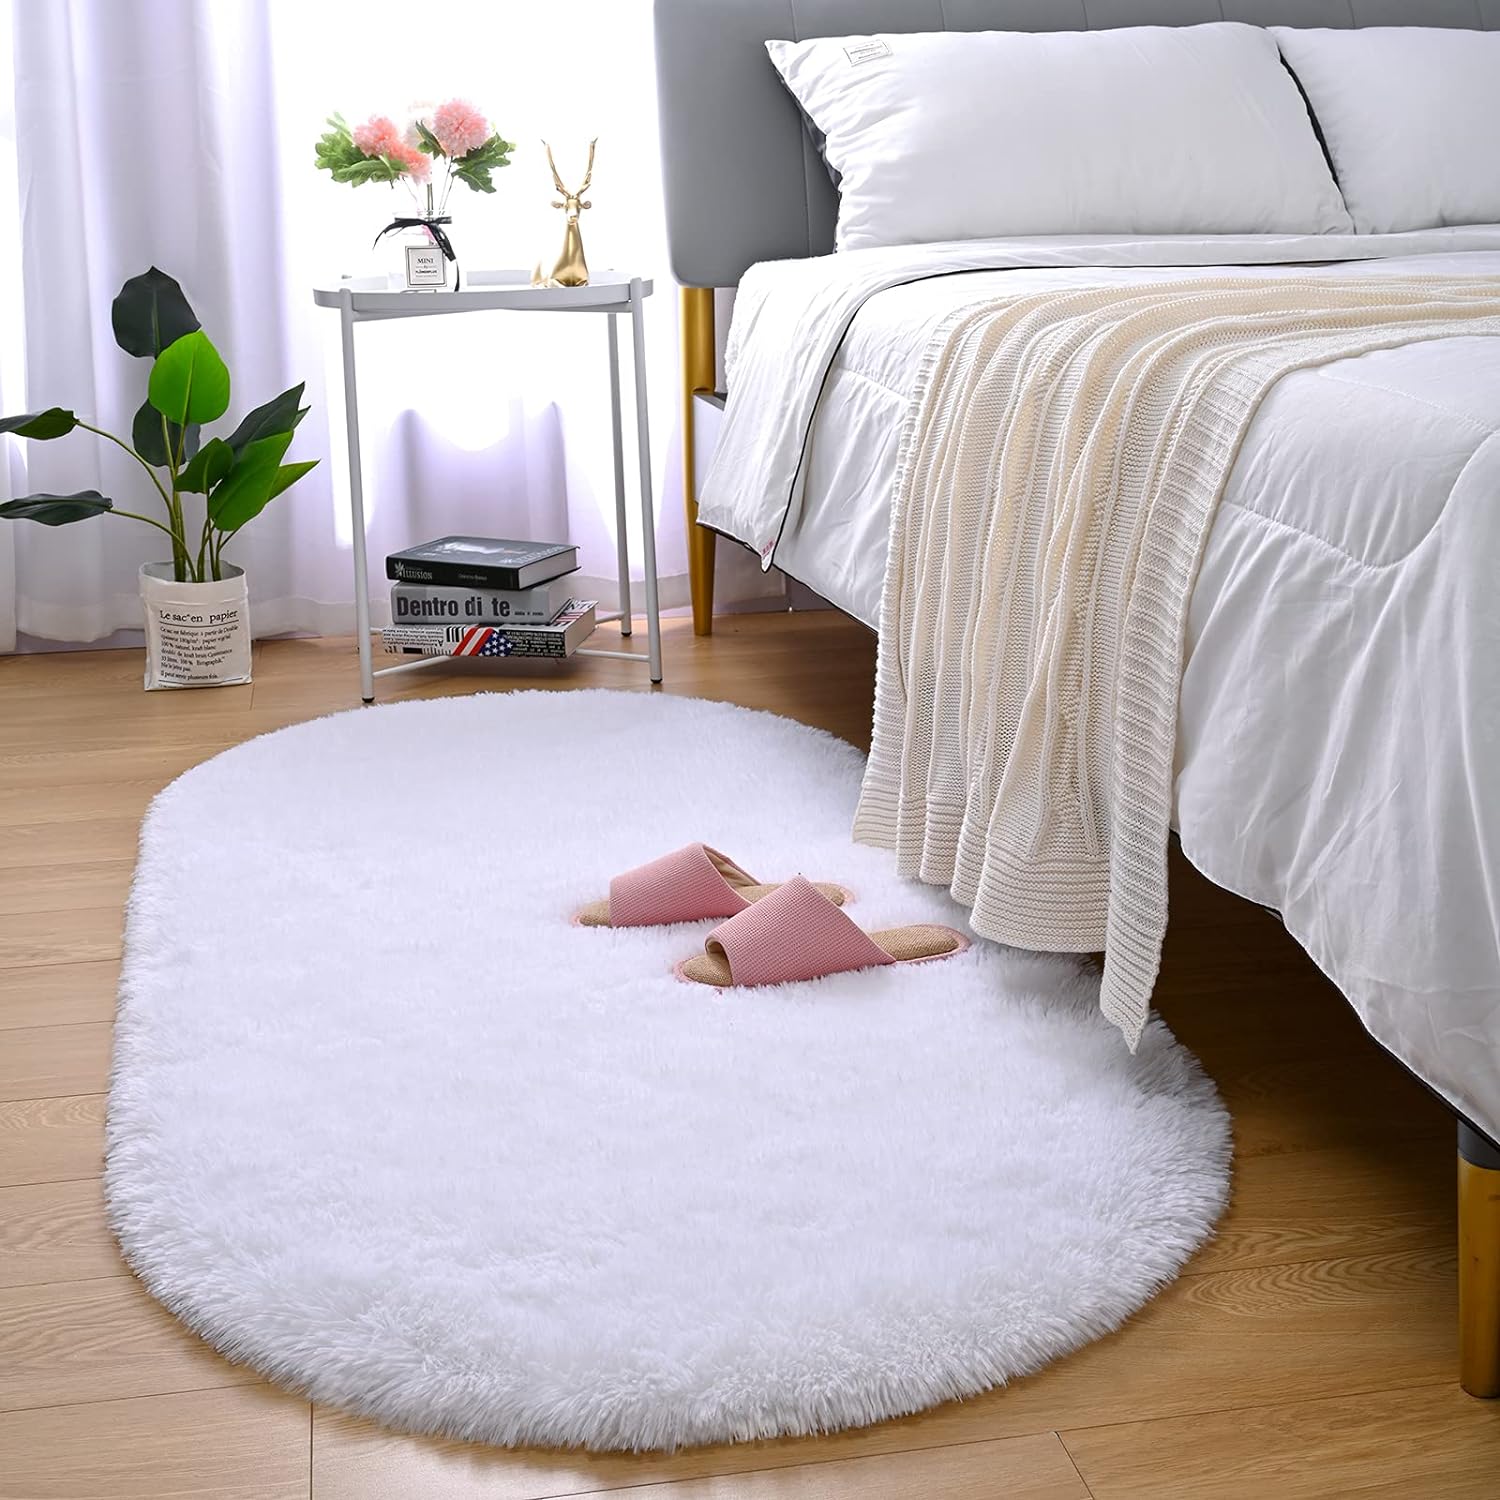 Merelax Soft Shaggy Rug for Kids Bedroom, Oval 2.6'x5.3' White Plush Fluffy Carpets for Living Room, Furry Carpet for Teen Girls Room, Anti-Skid Fuzzy Comfy Rug for Nursery Decor Cute Baby Play Mat